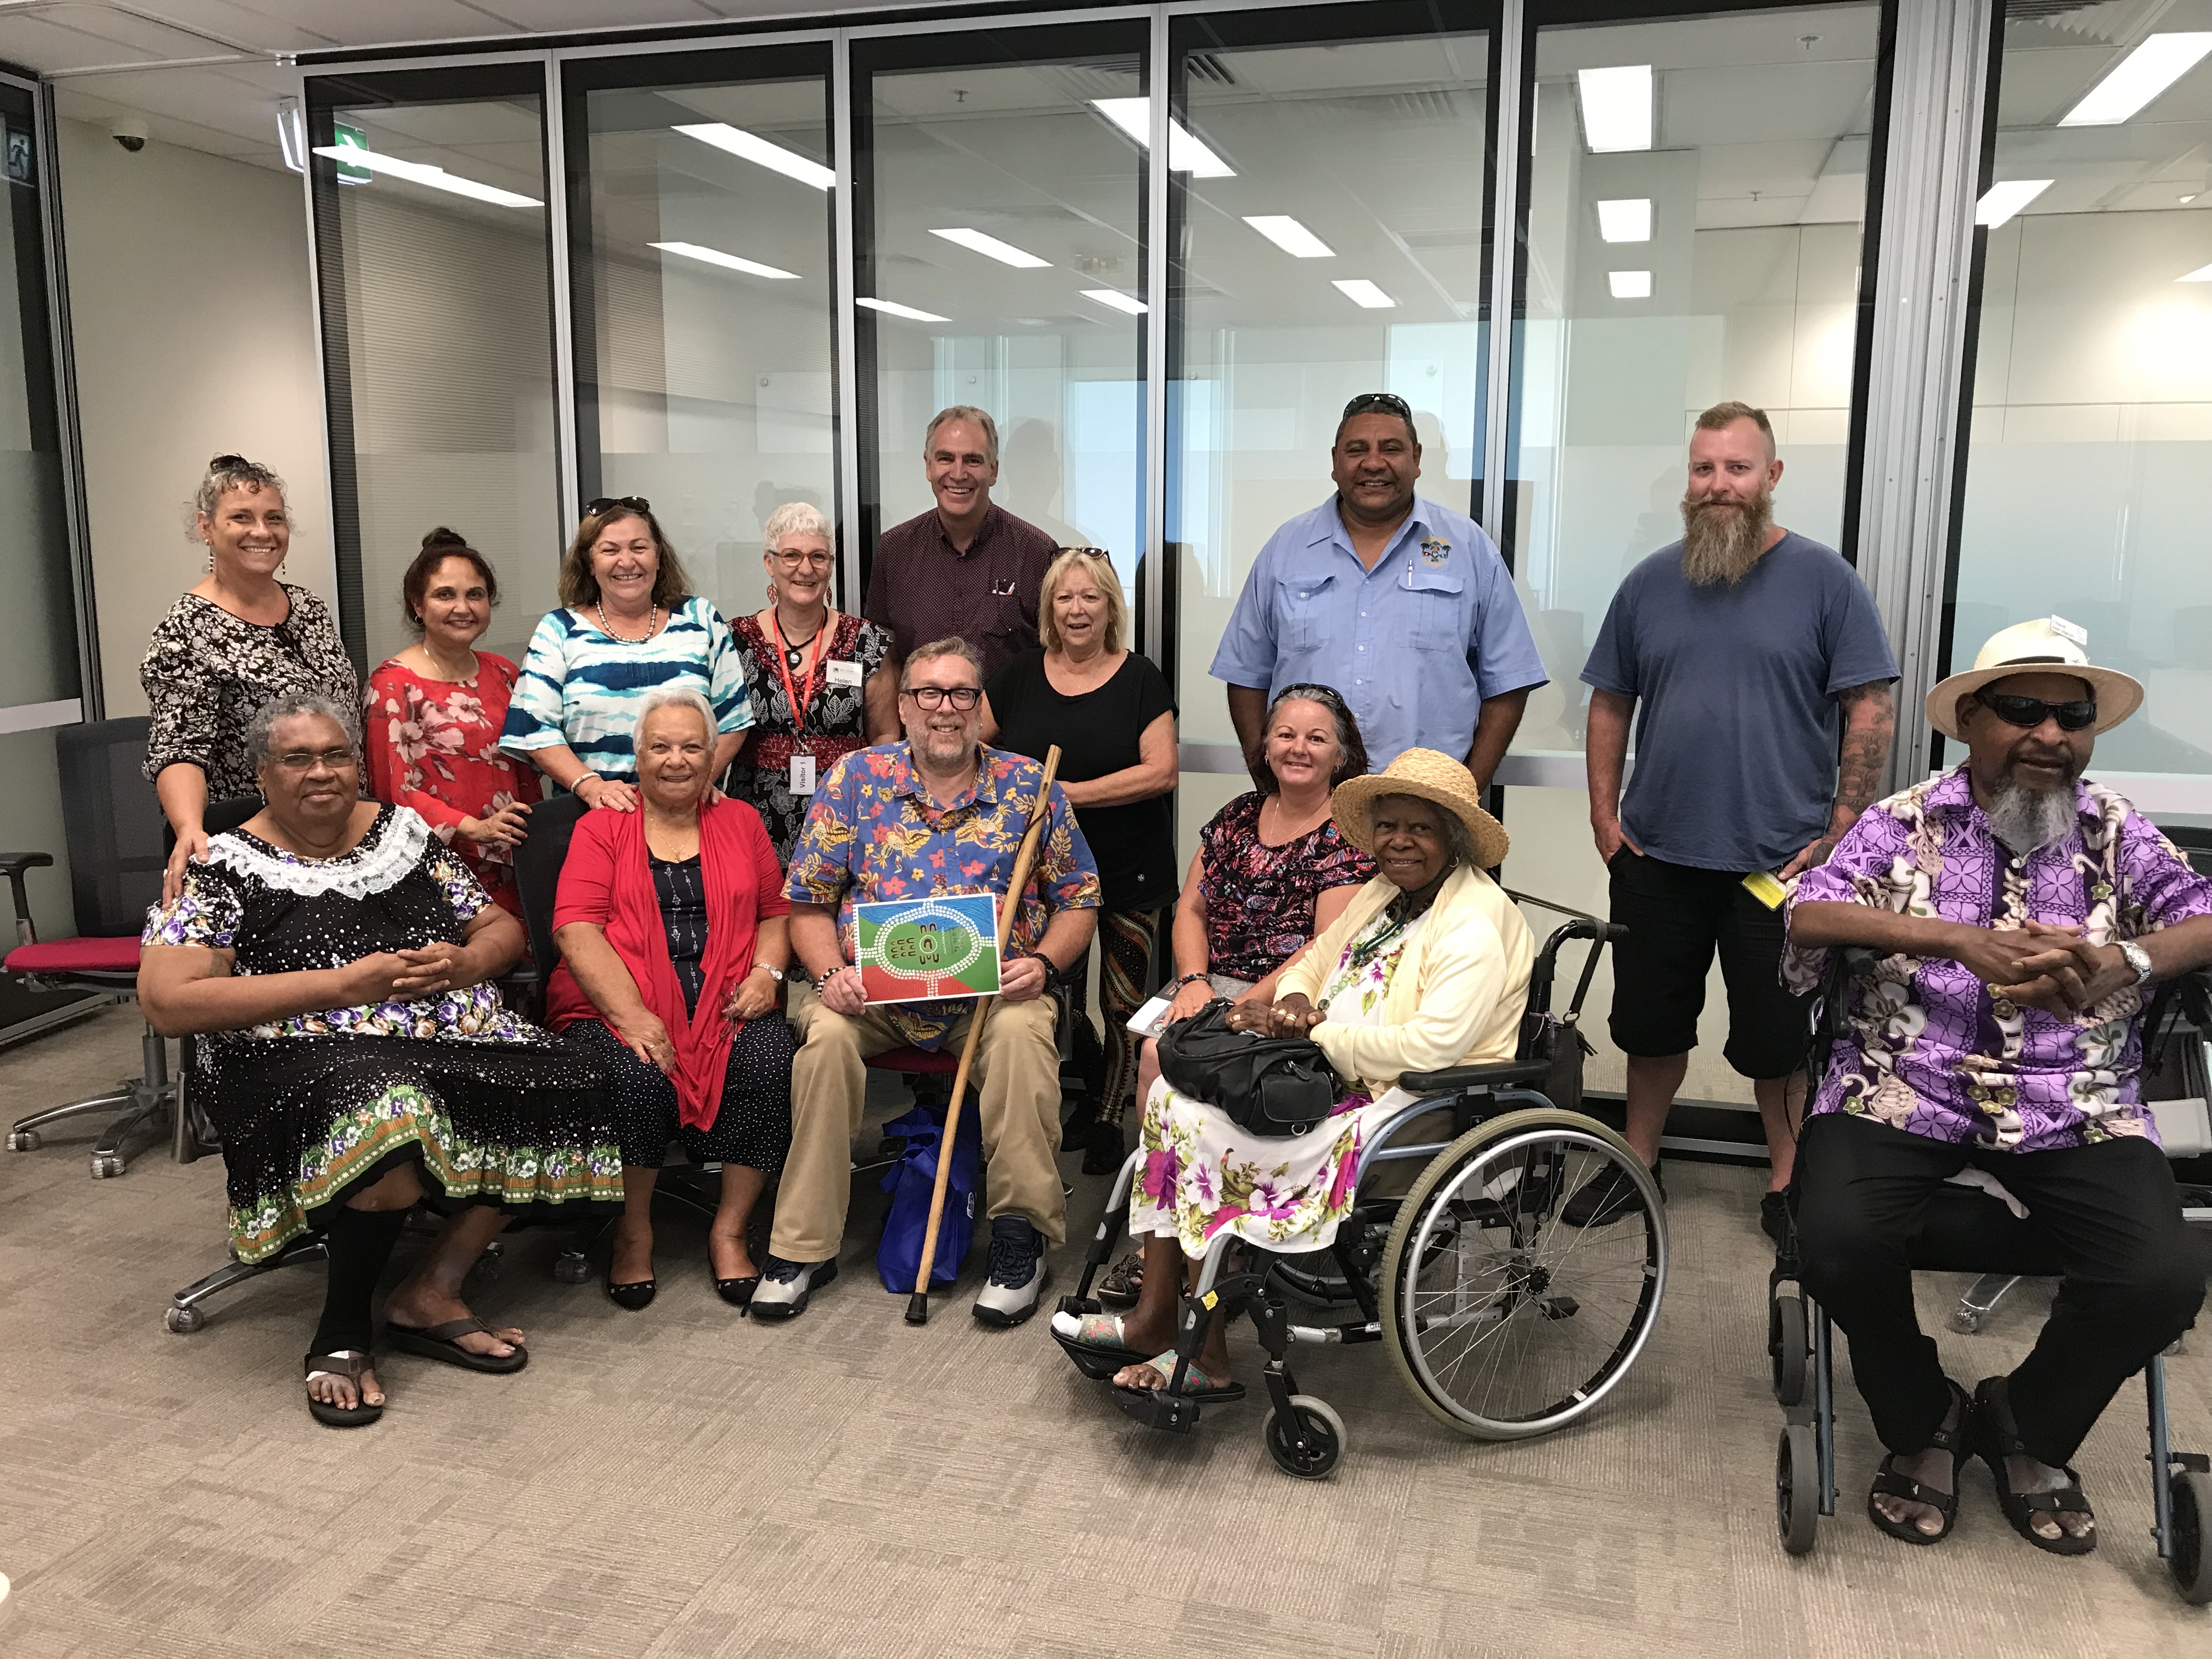 Launch of FPDN’s National ‘Our Way’ Disability Planning Resource in Townsville